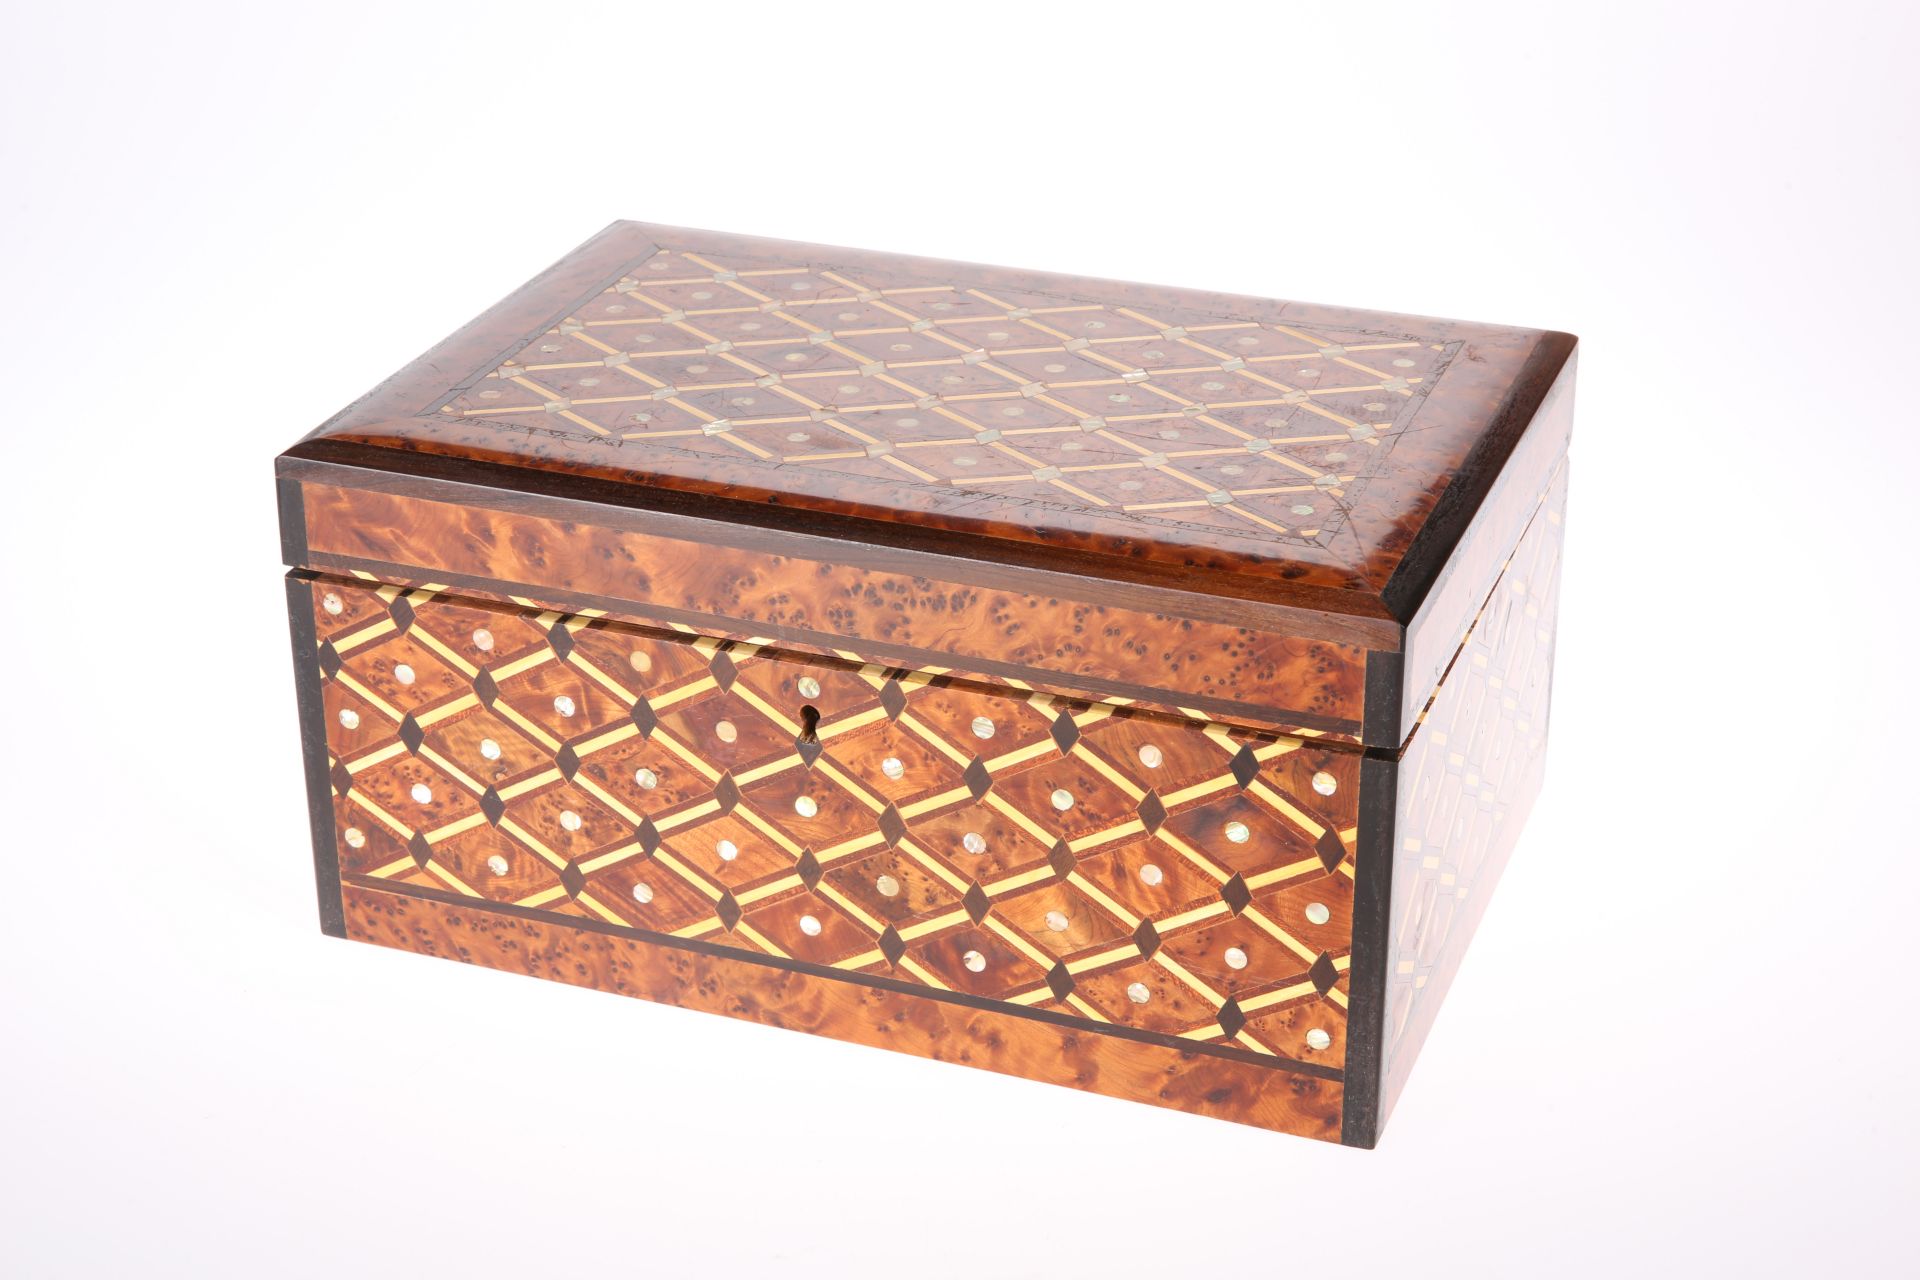 A MOTHER-OF-PEARL INLAID BURR YEW CASKET, of good quality, rectangular with hinged lid and lift-